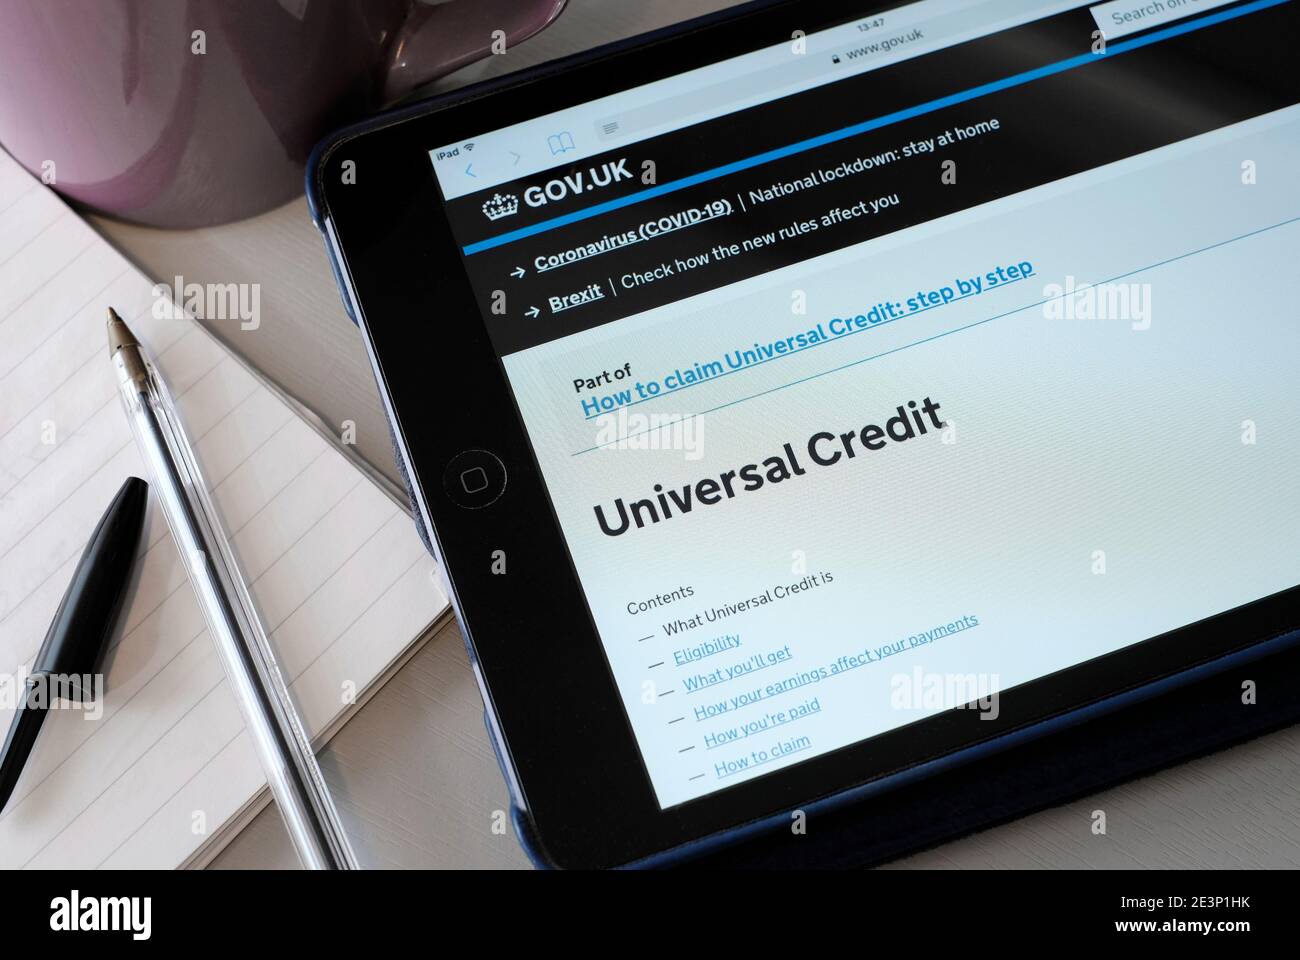 universal credit homepage on official gov.uk website Stock Photo